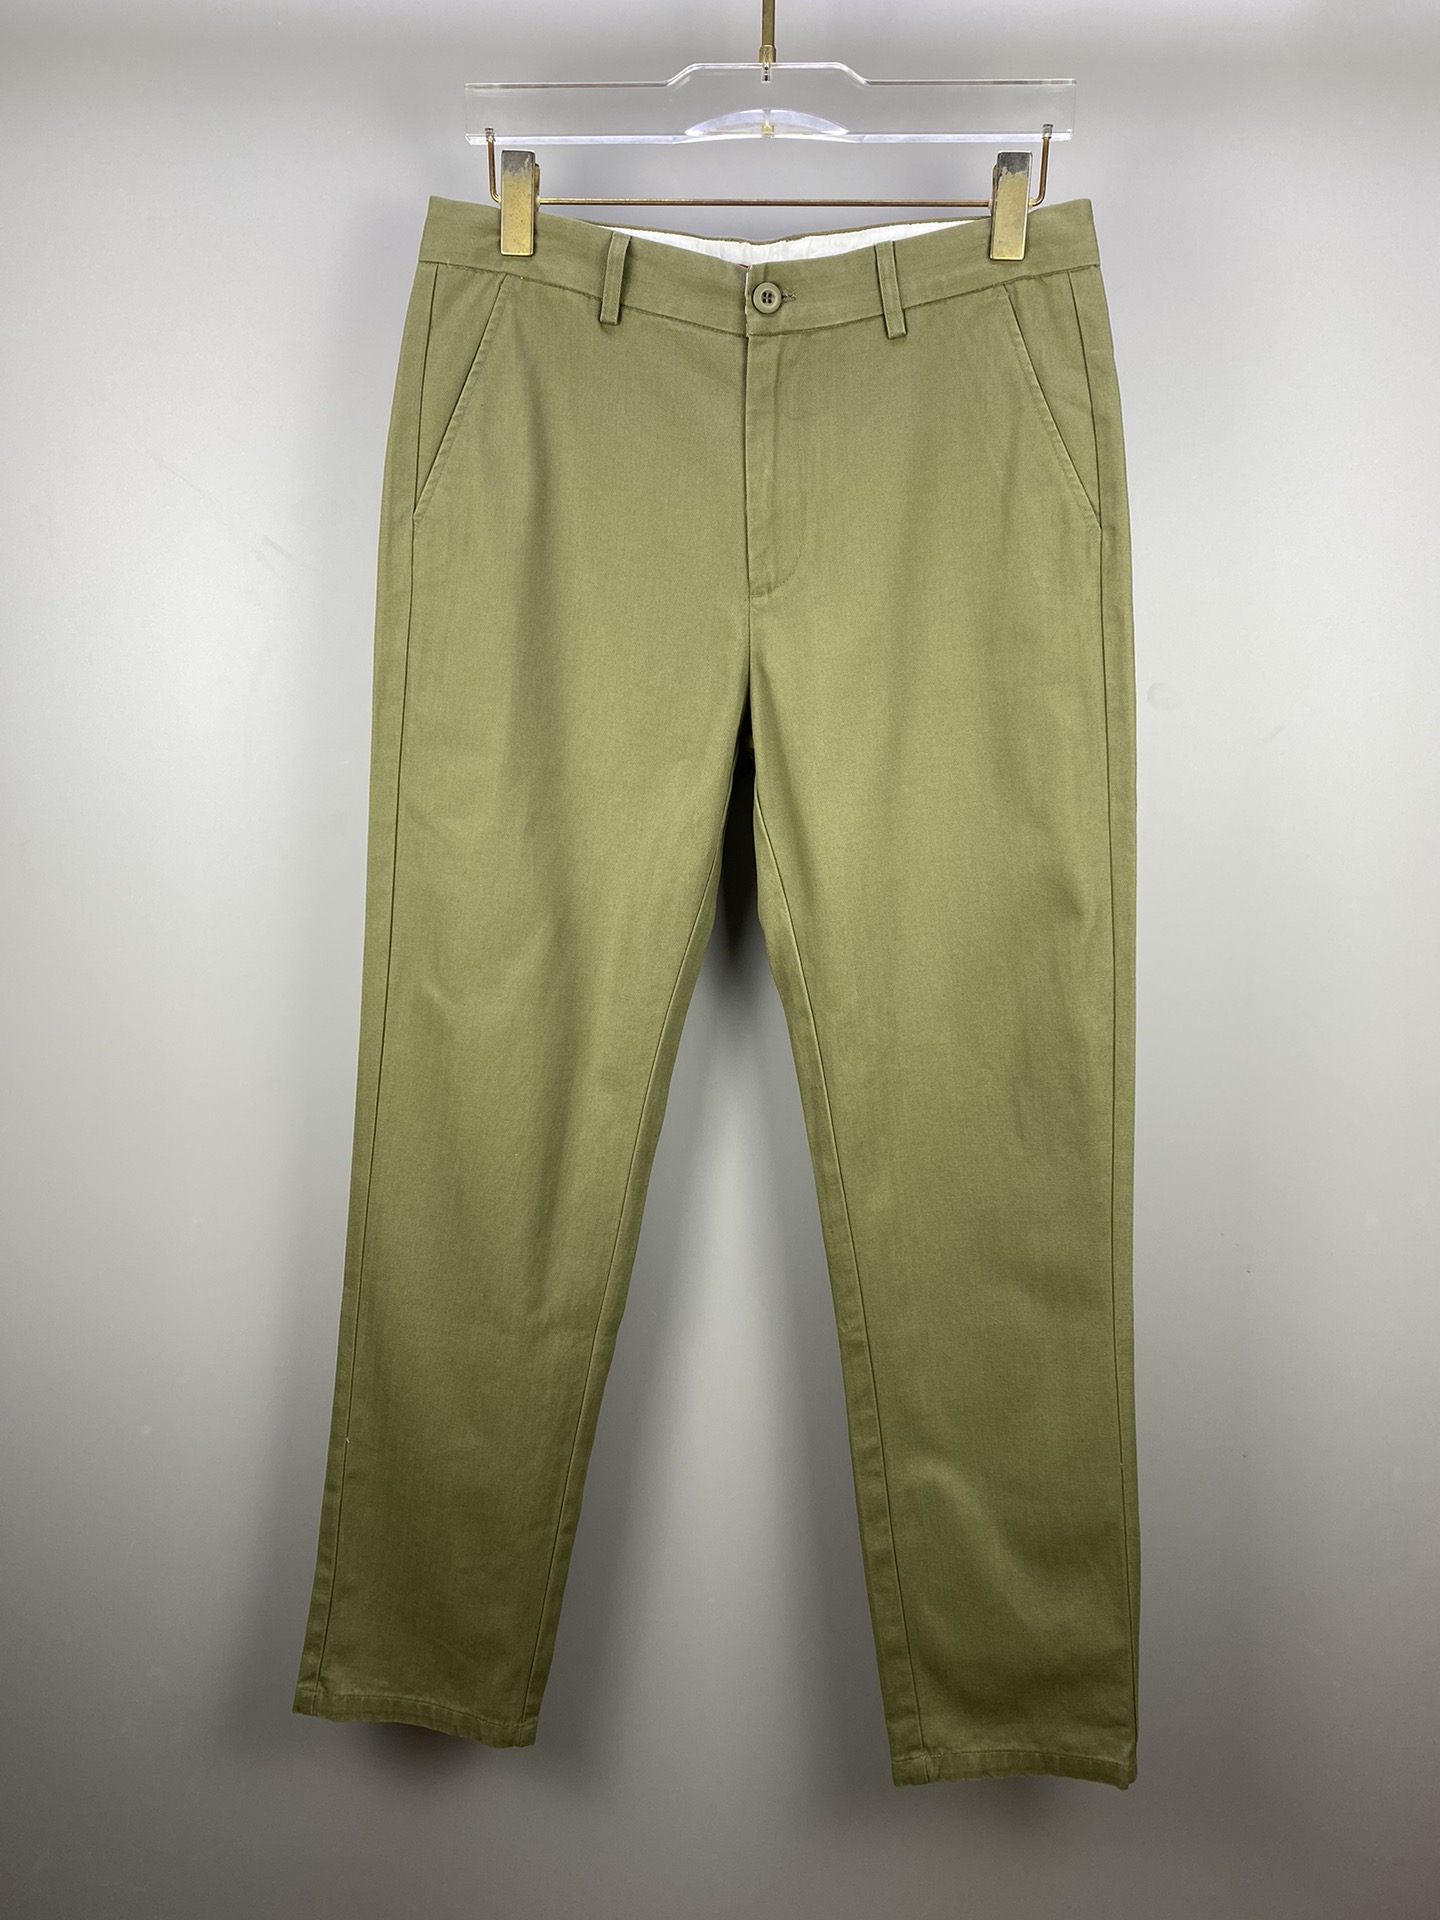 Thom Browne Clothing Pants & Trousers ArmyGreen Black Brown Green Khaki Embroidery Men Fall/Winter Collection Casual